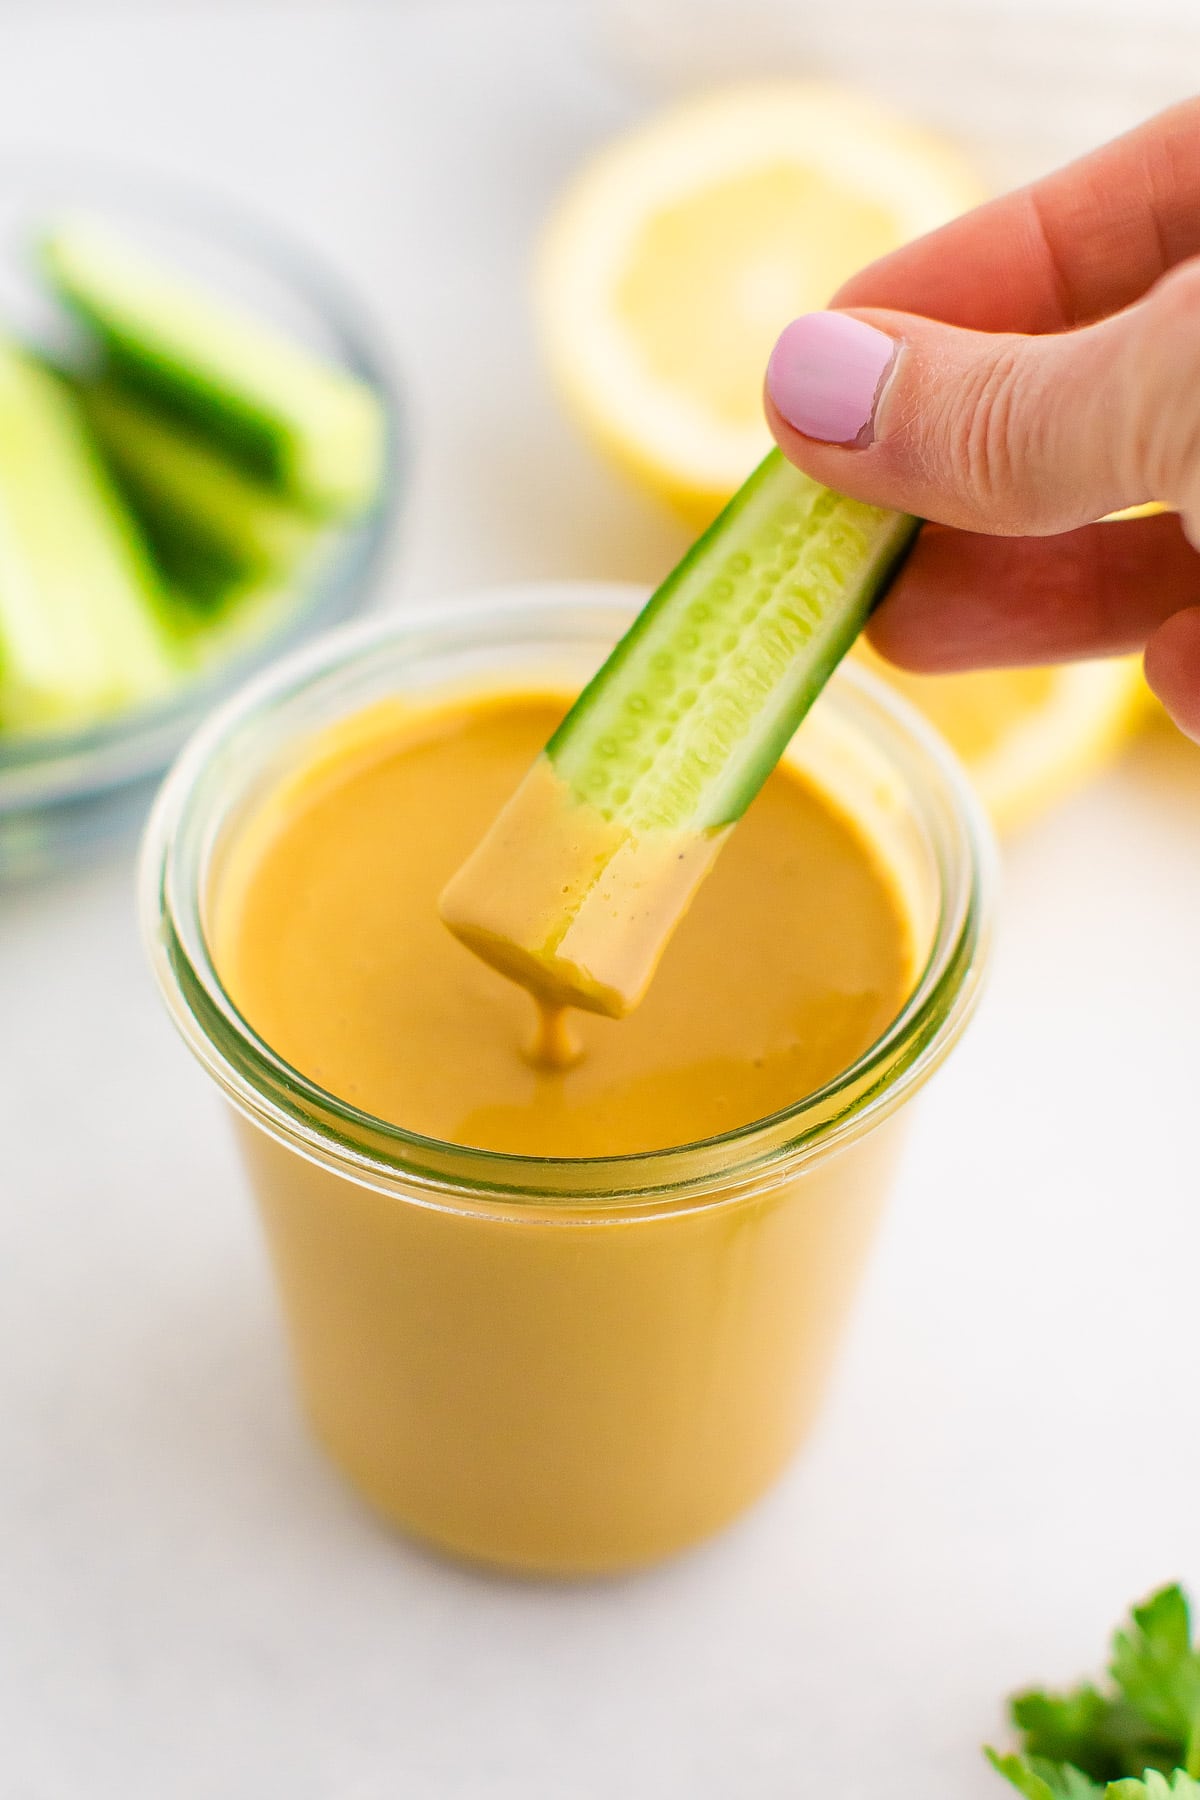 Person dipping a cucumber slice into a jar of tahini dip.